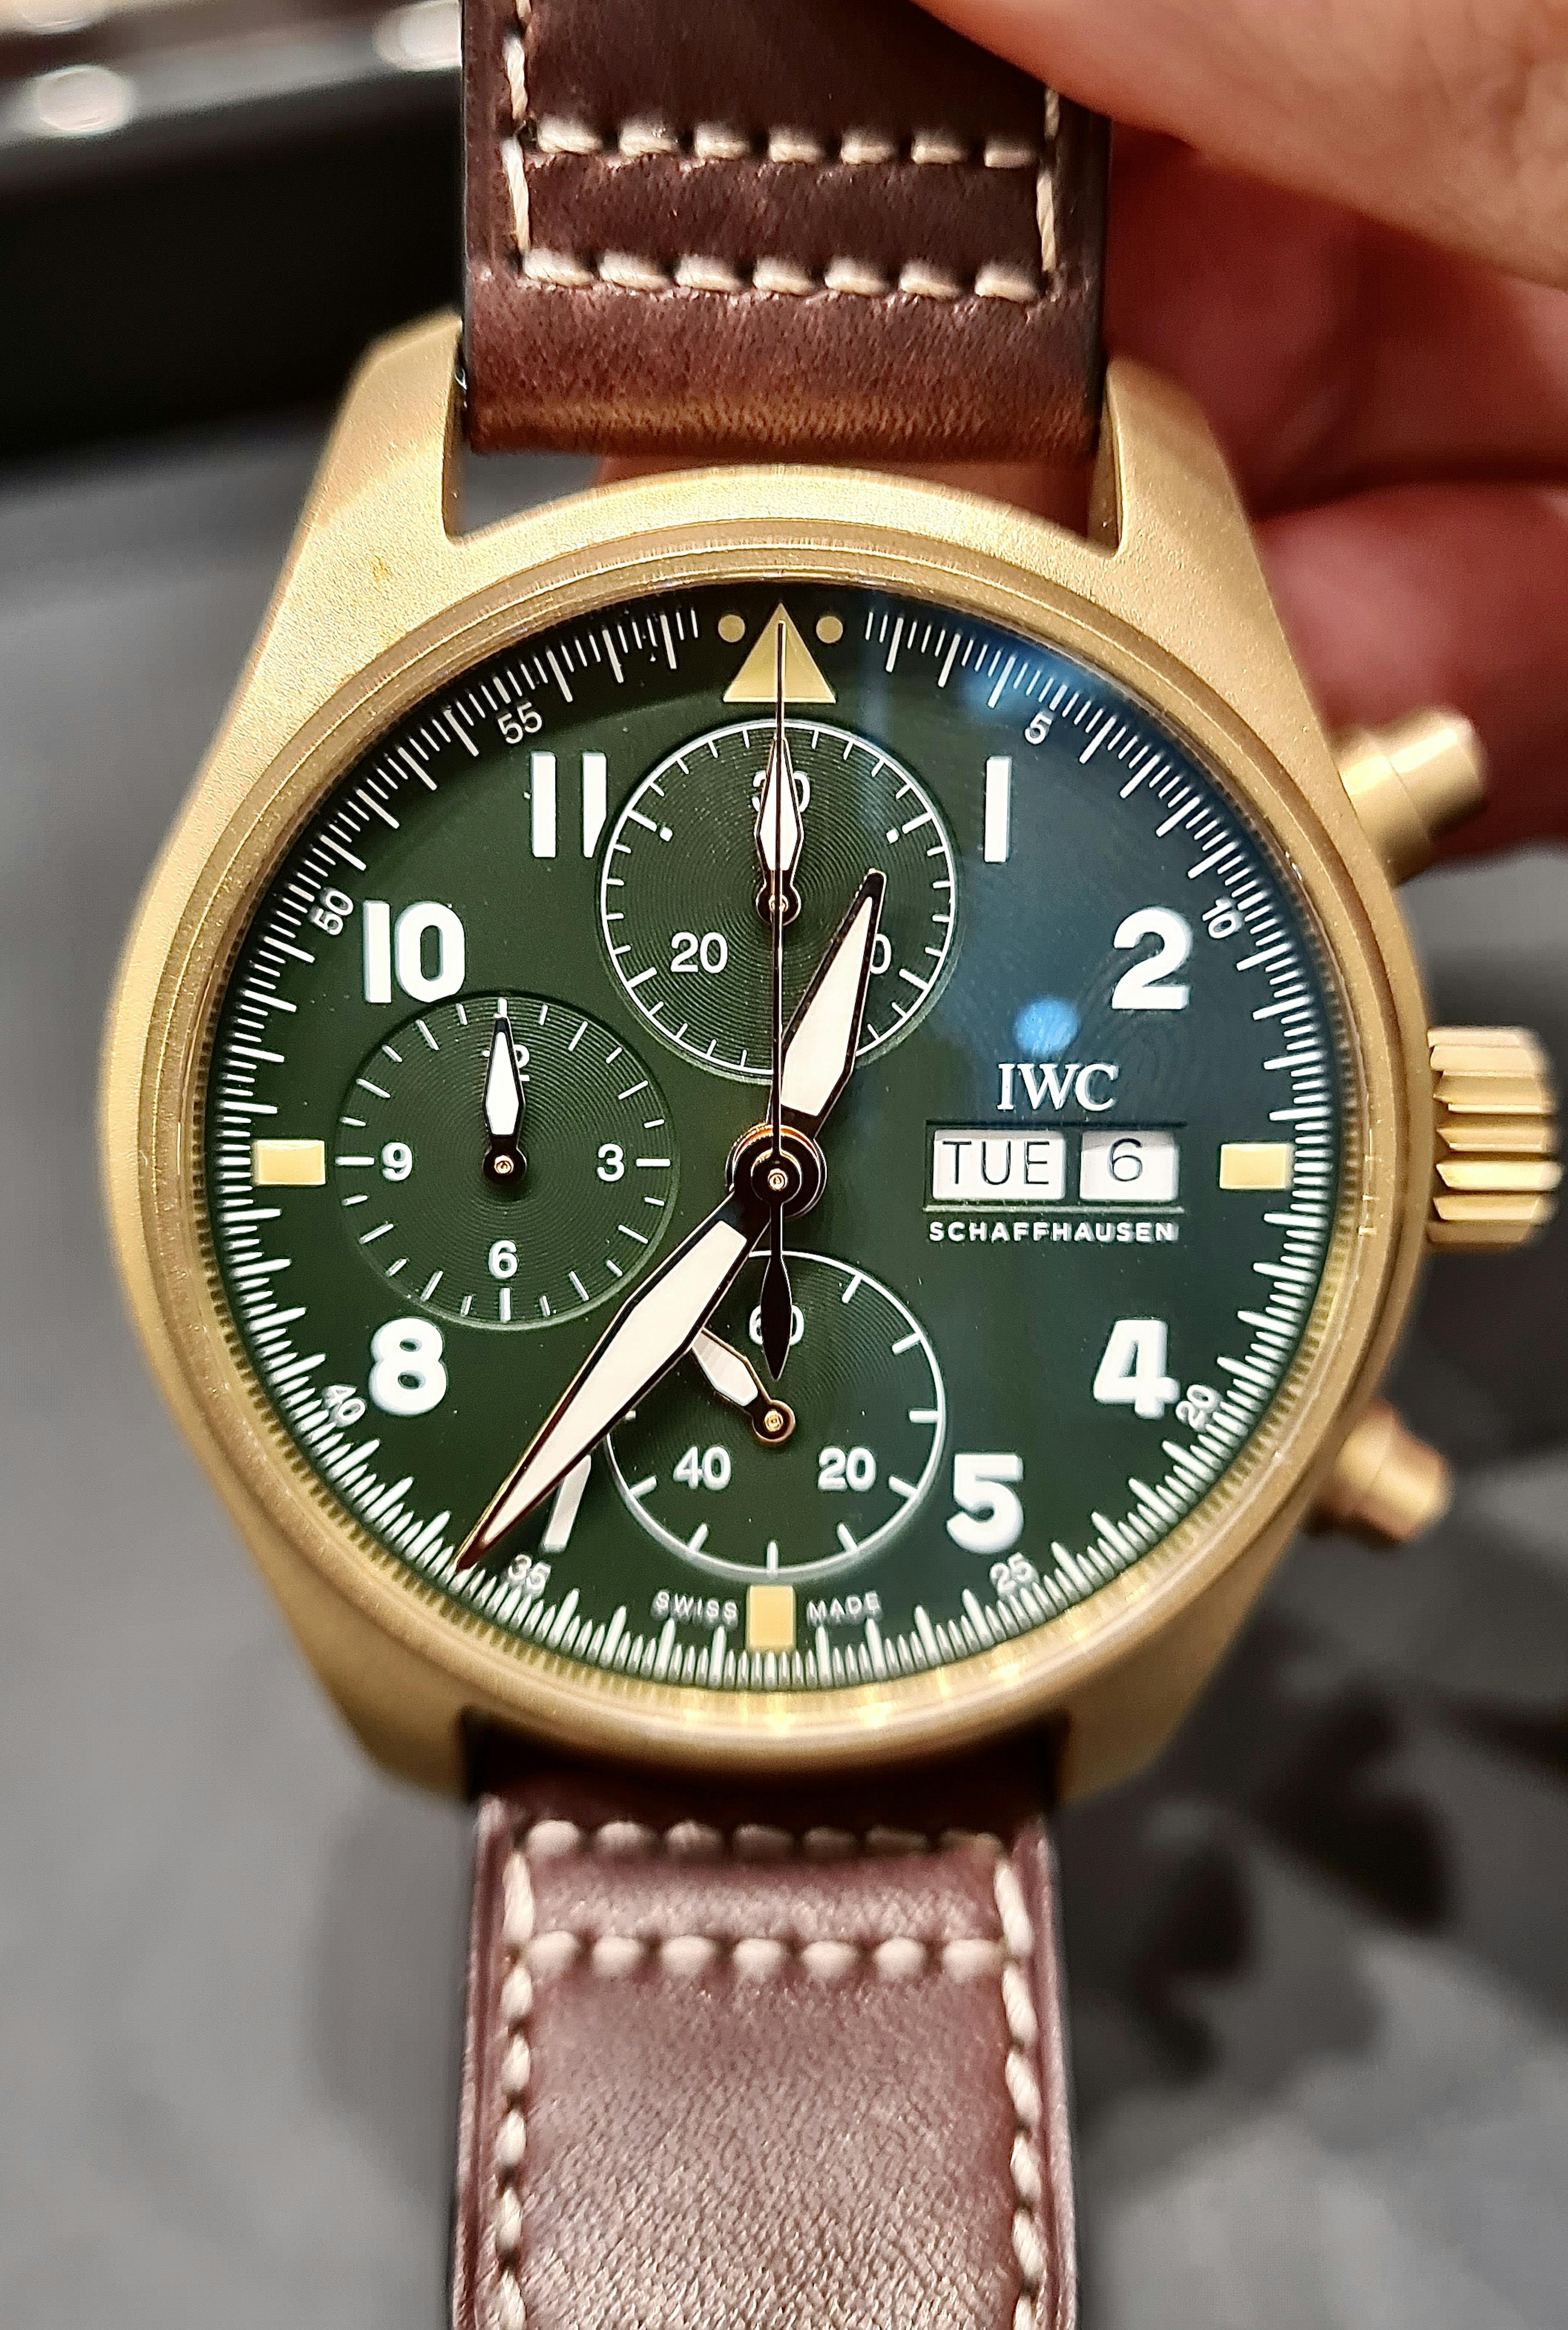 A modern IWC Spitfire Chronograph. You can clearly see the pusher buttons at 2 and 4 o'clock